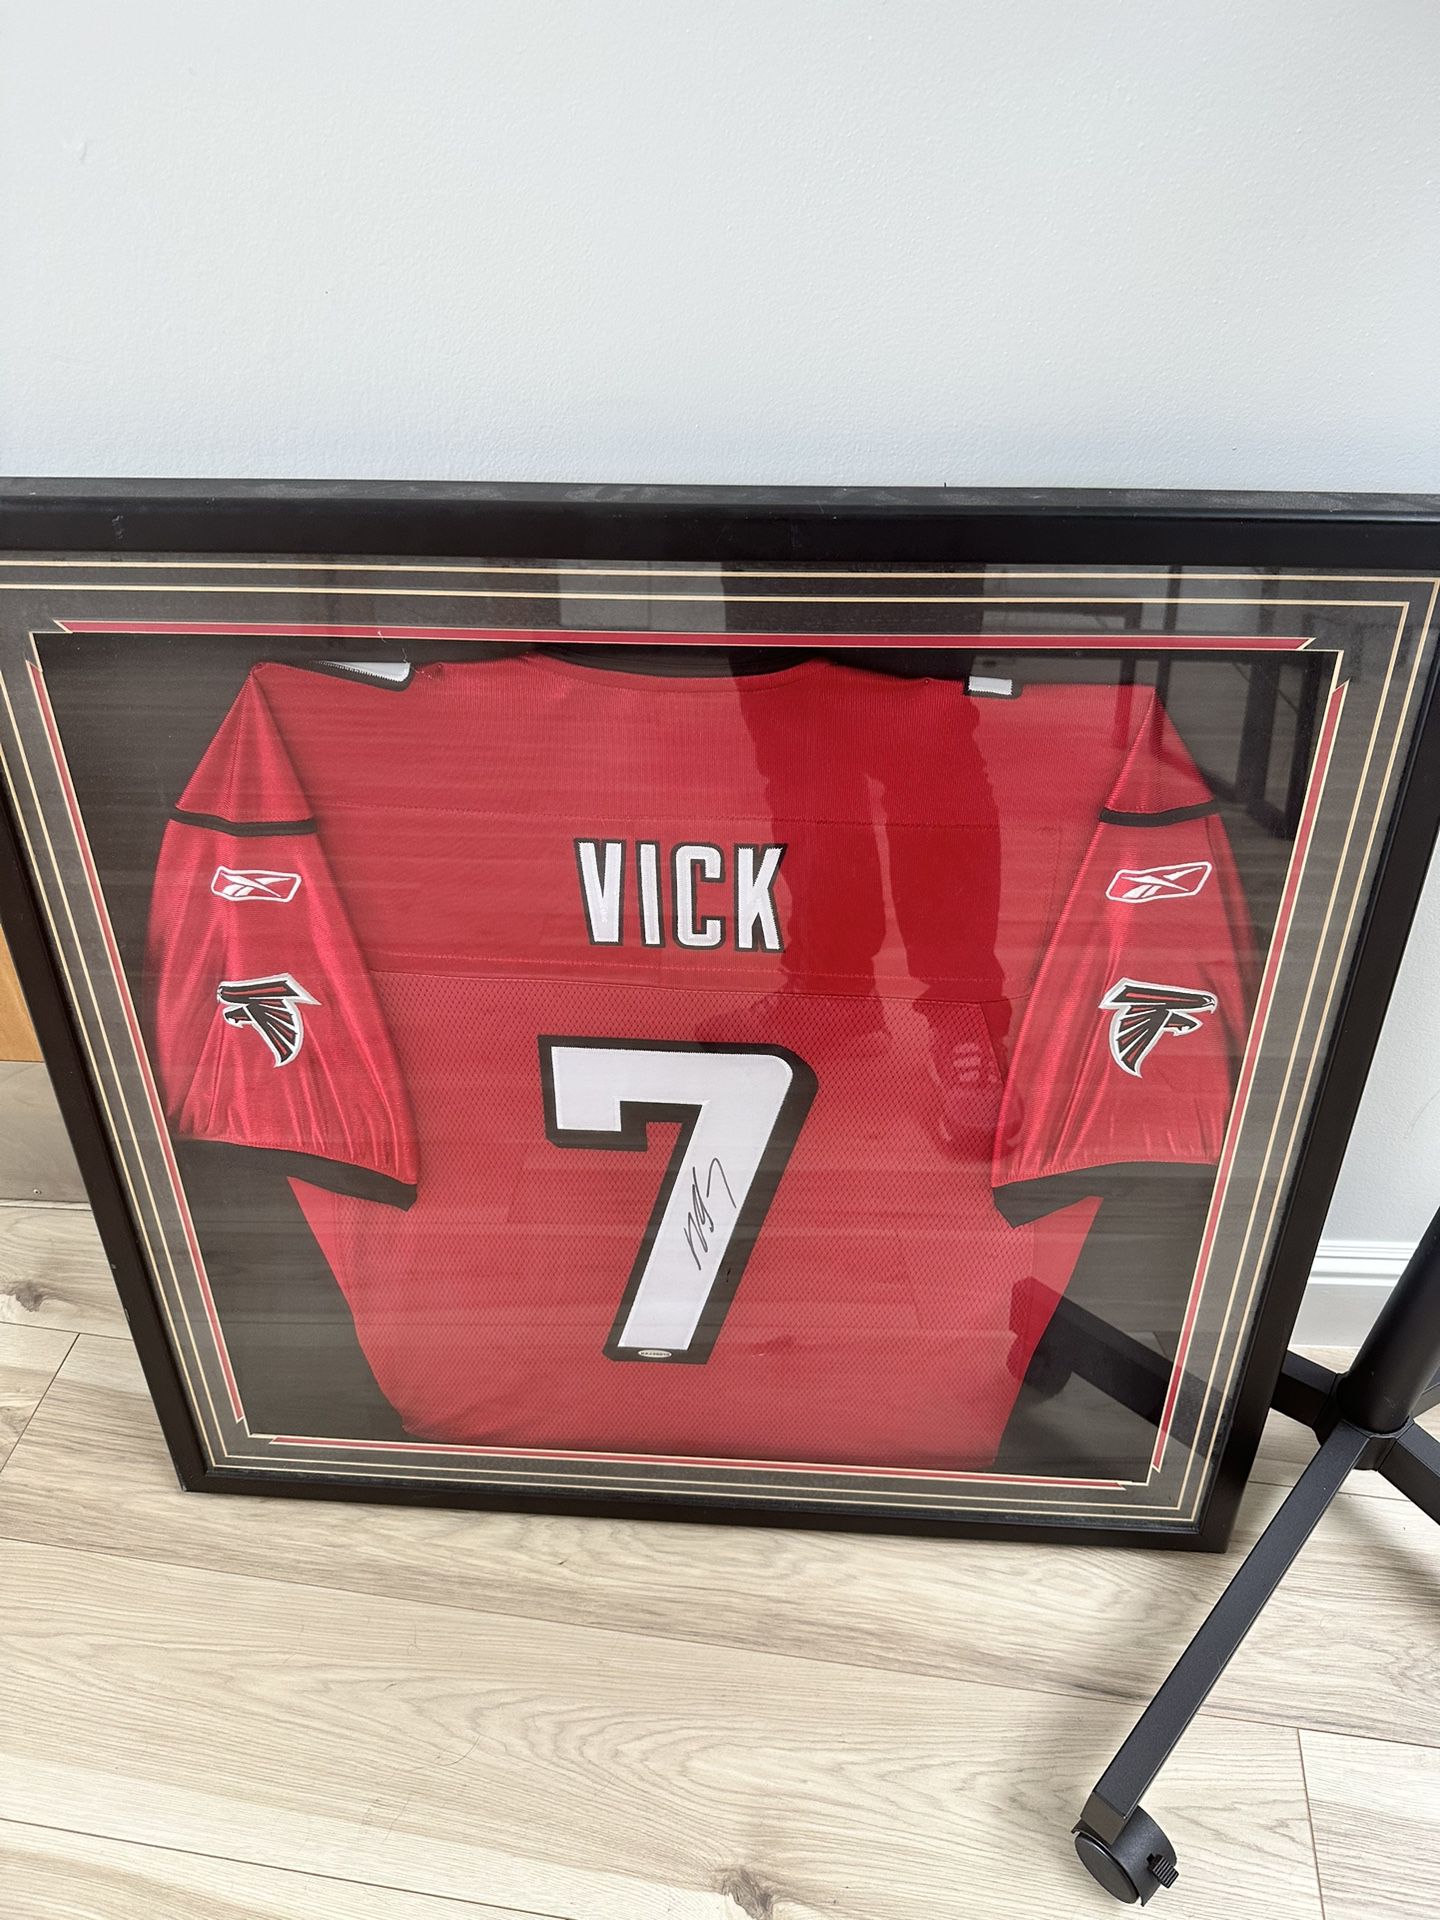 Michael Vick framed autographed jersey for Sale in Alameda, CA